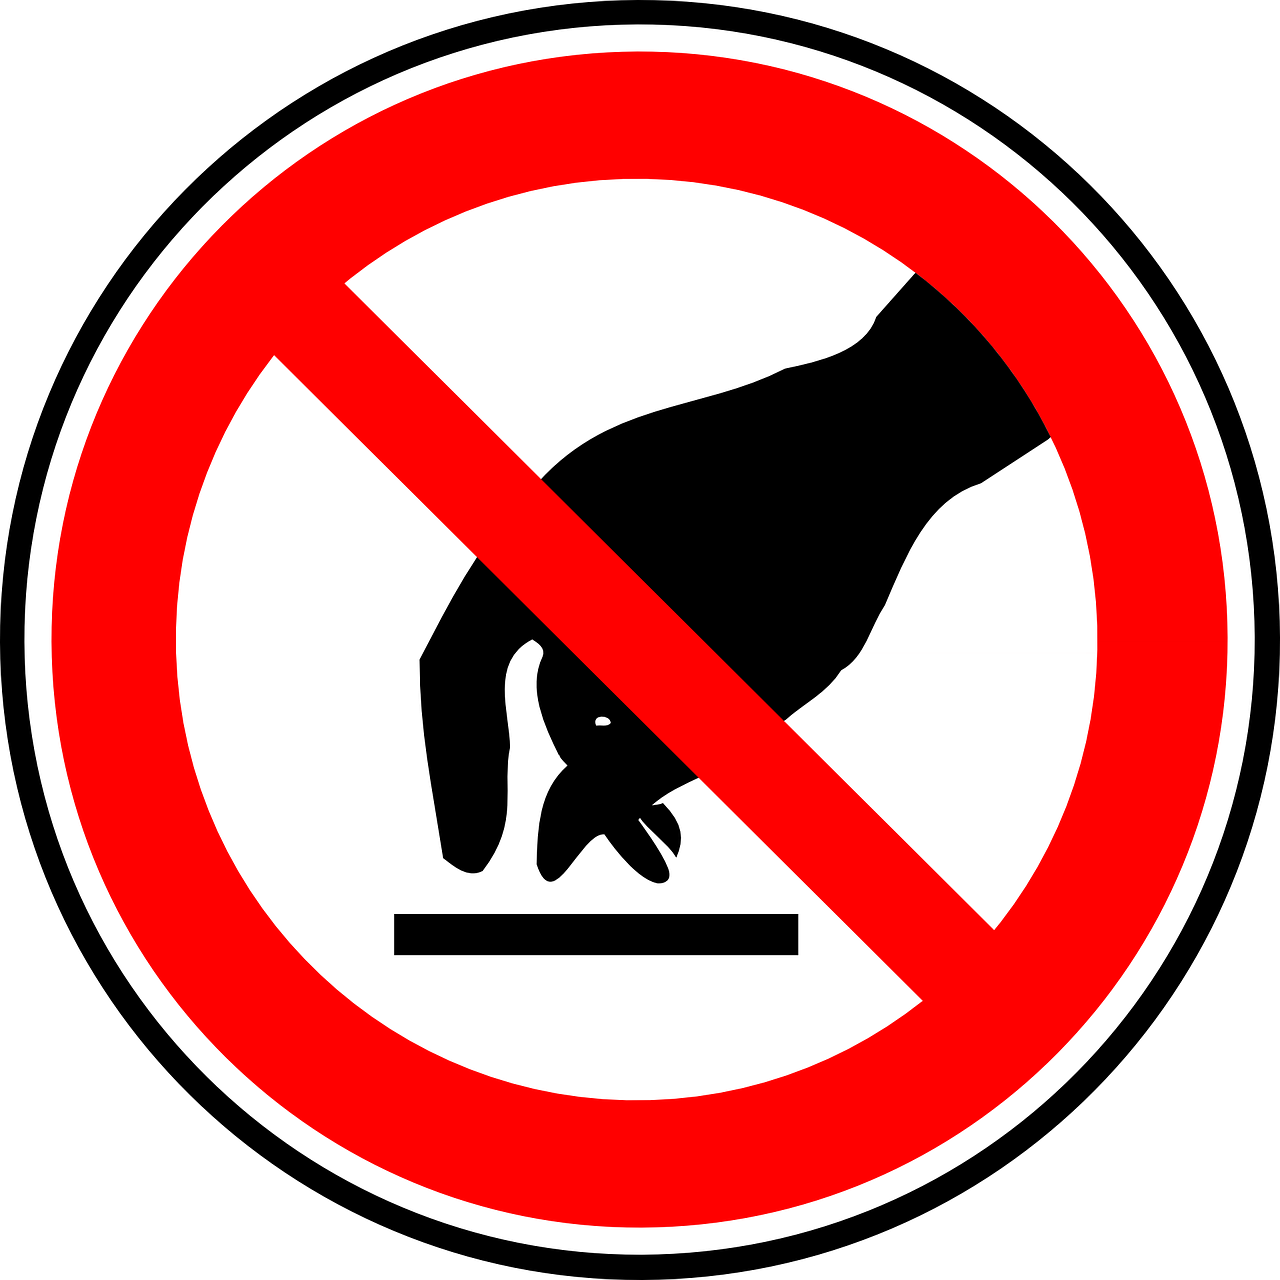 No Entry Prohibition Do Not Touch Forbidden Royalty Free Stock Hot